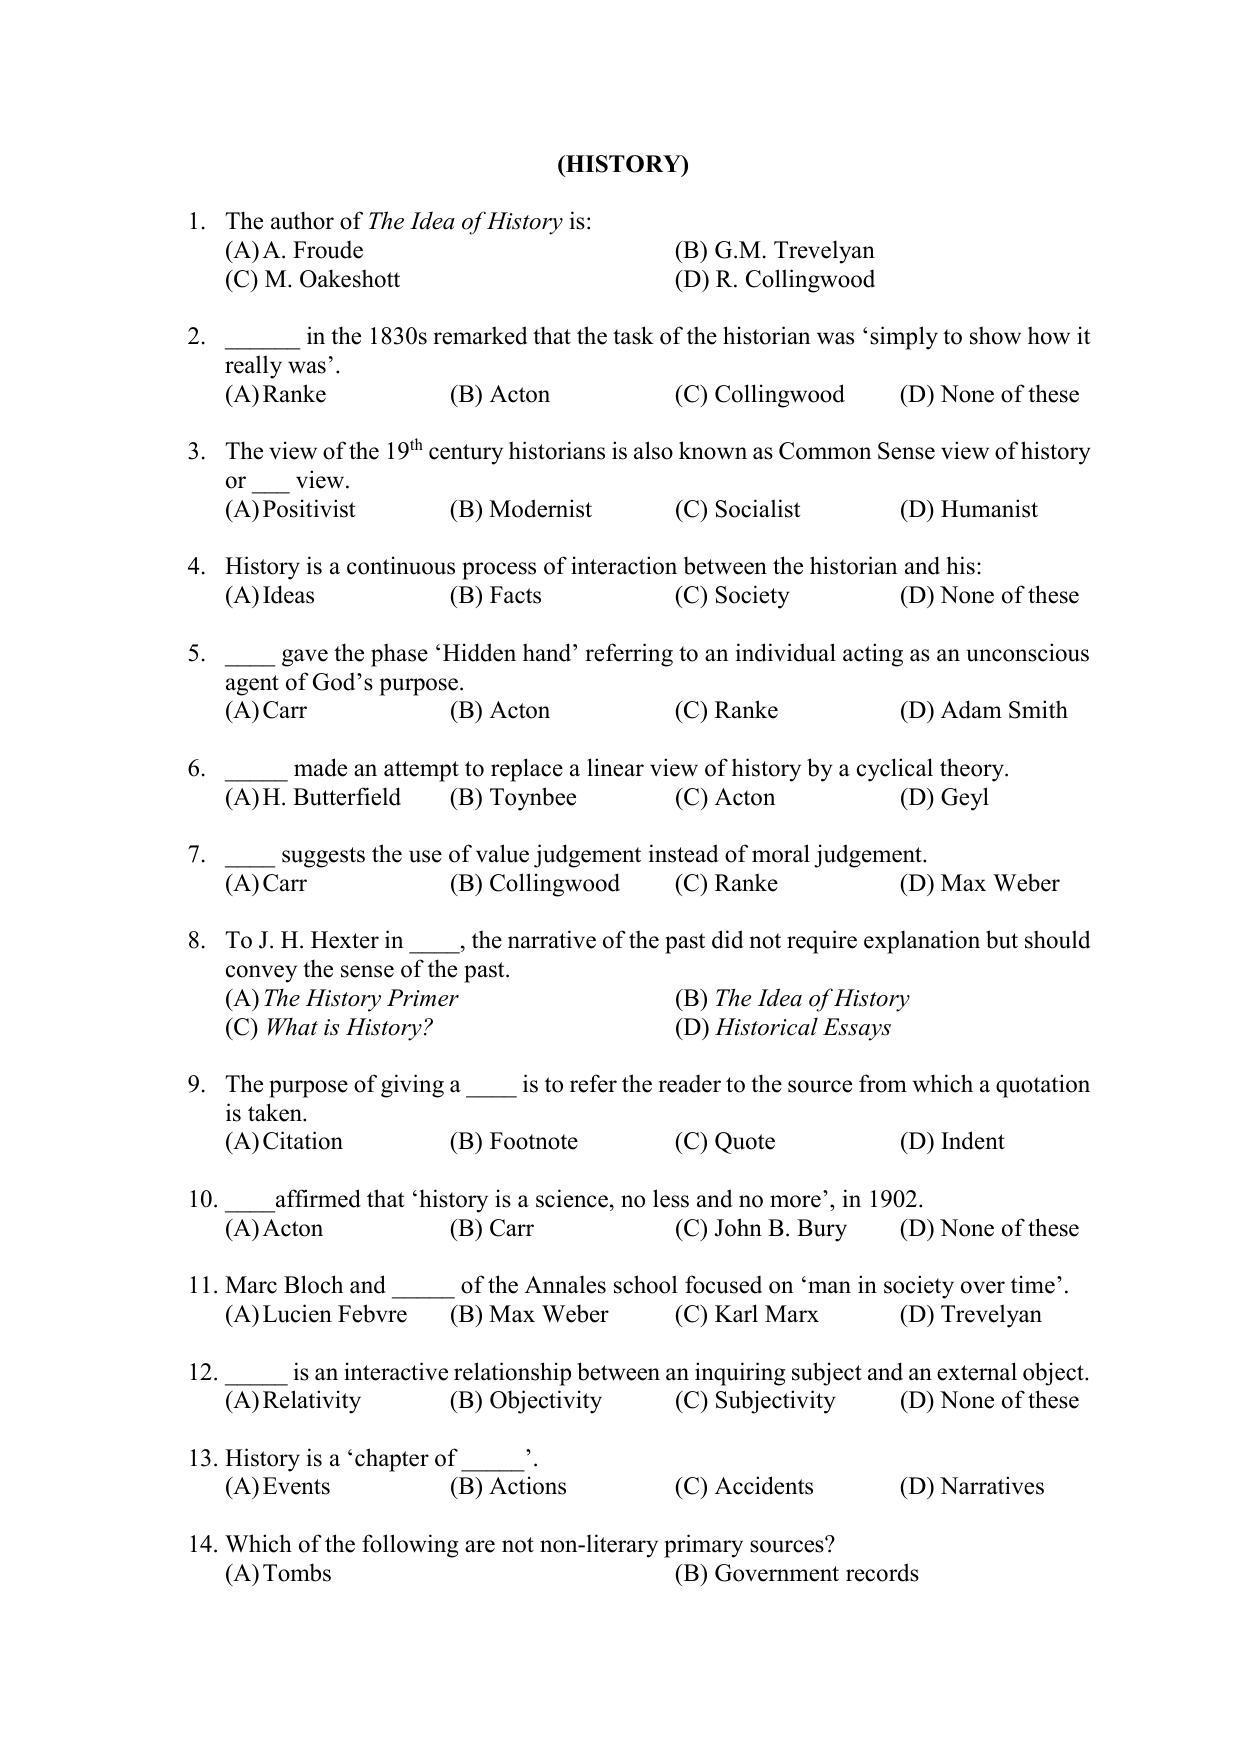 PU MPET Ancient Indian History & Archeology 2022 Question Papers - Page 18